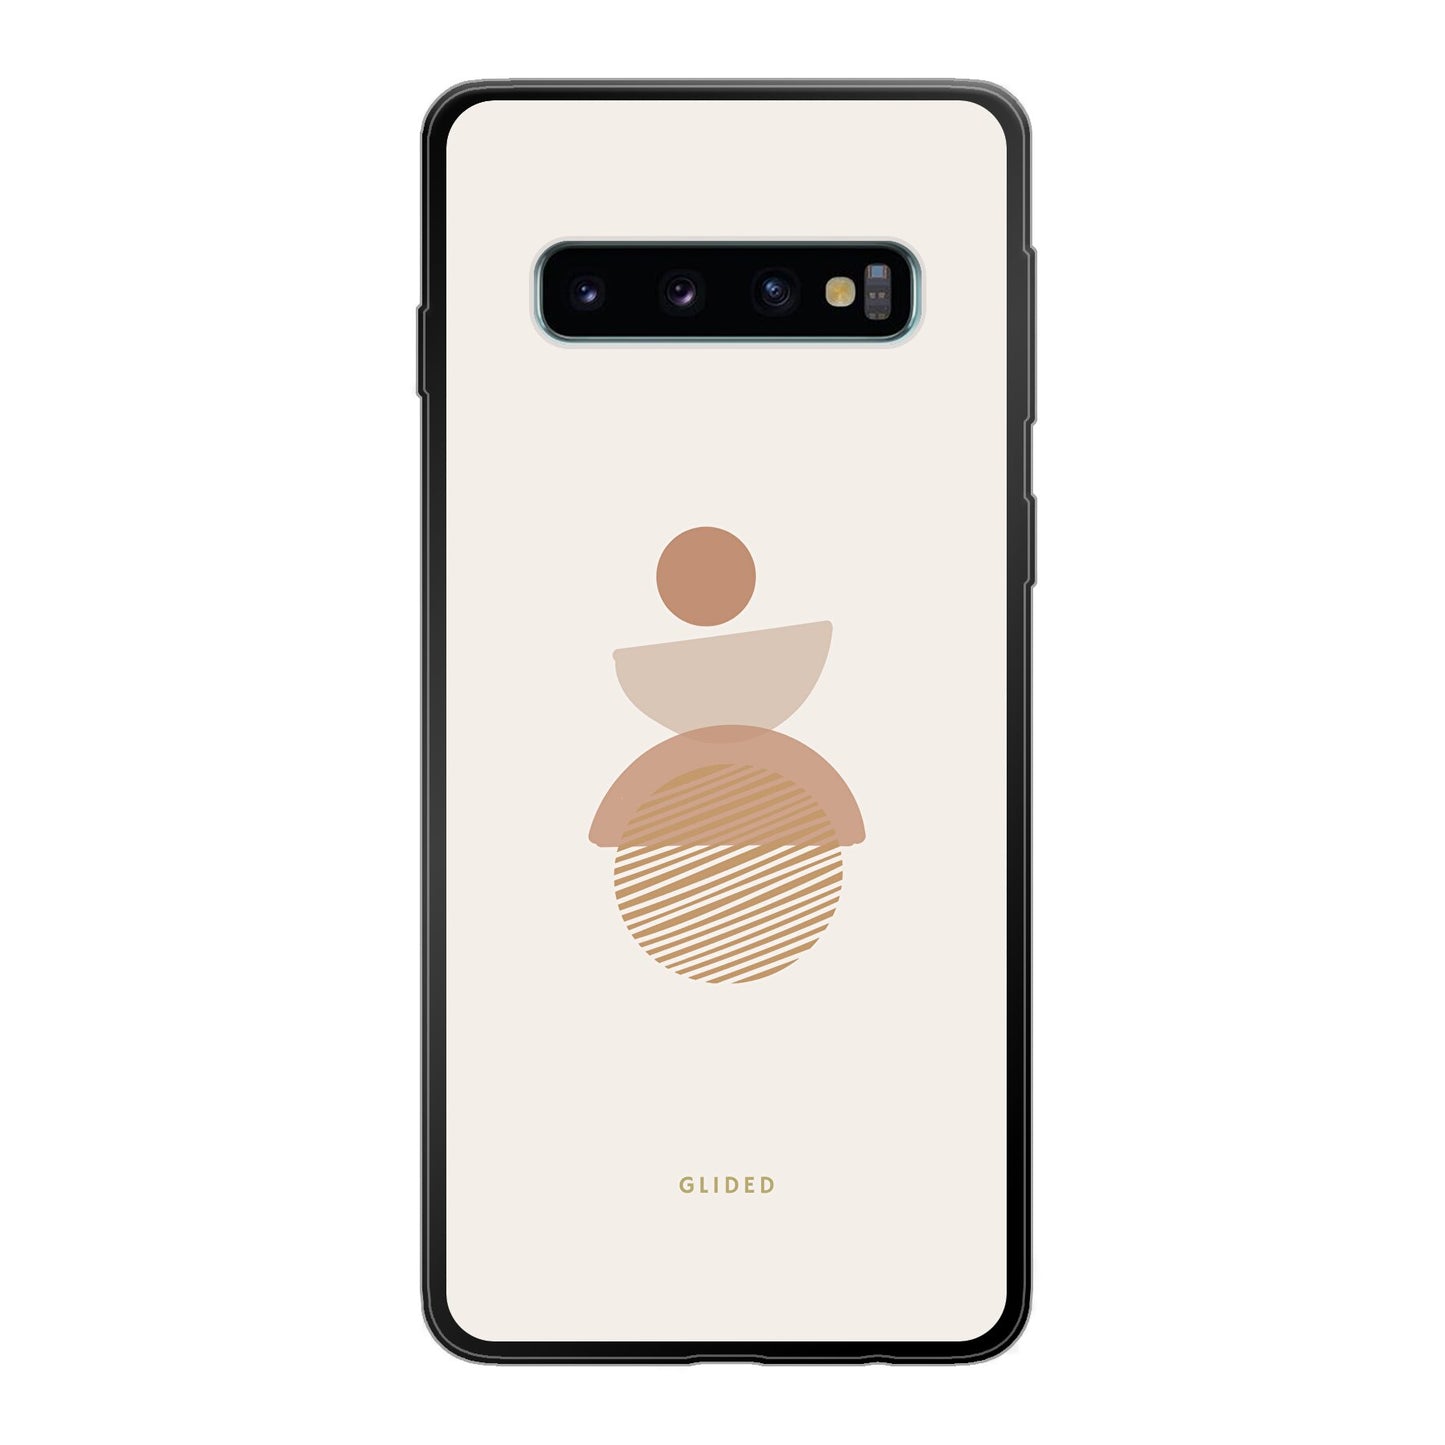 Solace - Samsung Galaxy S10 Handyhülle Soft case